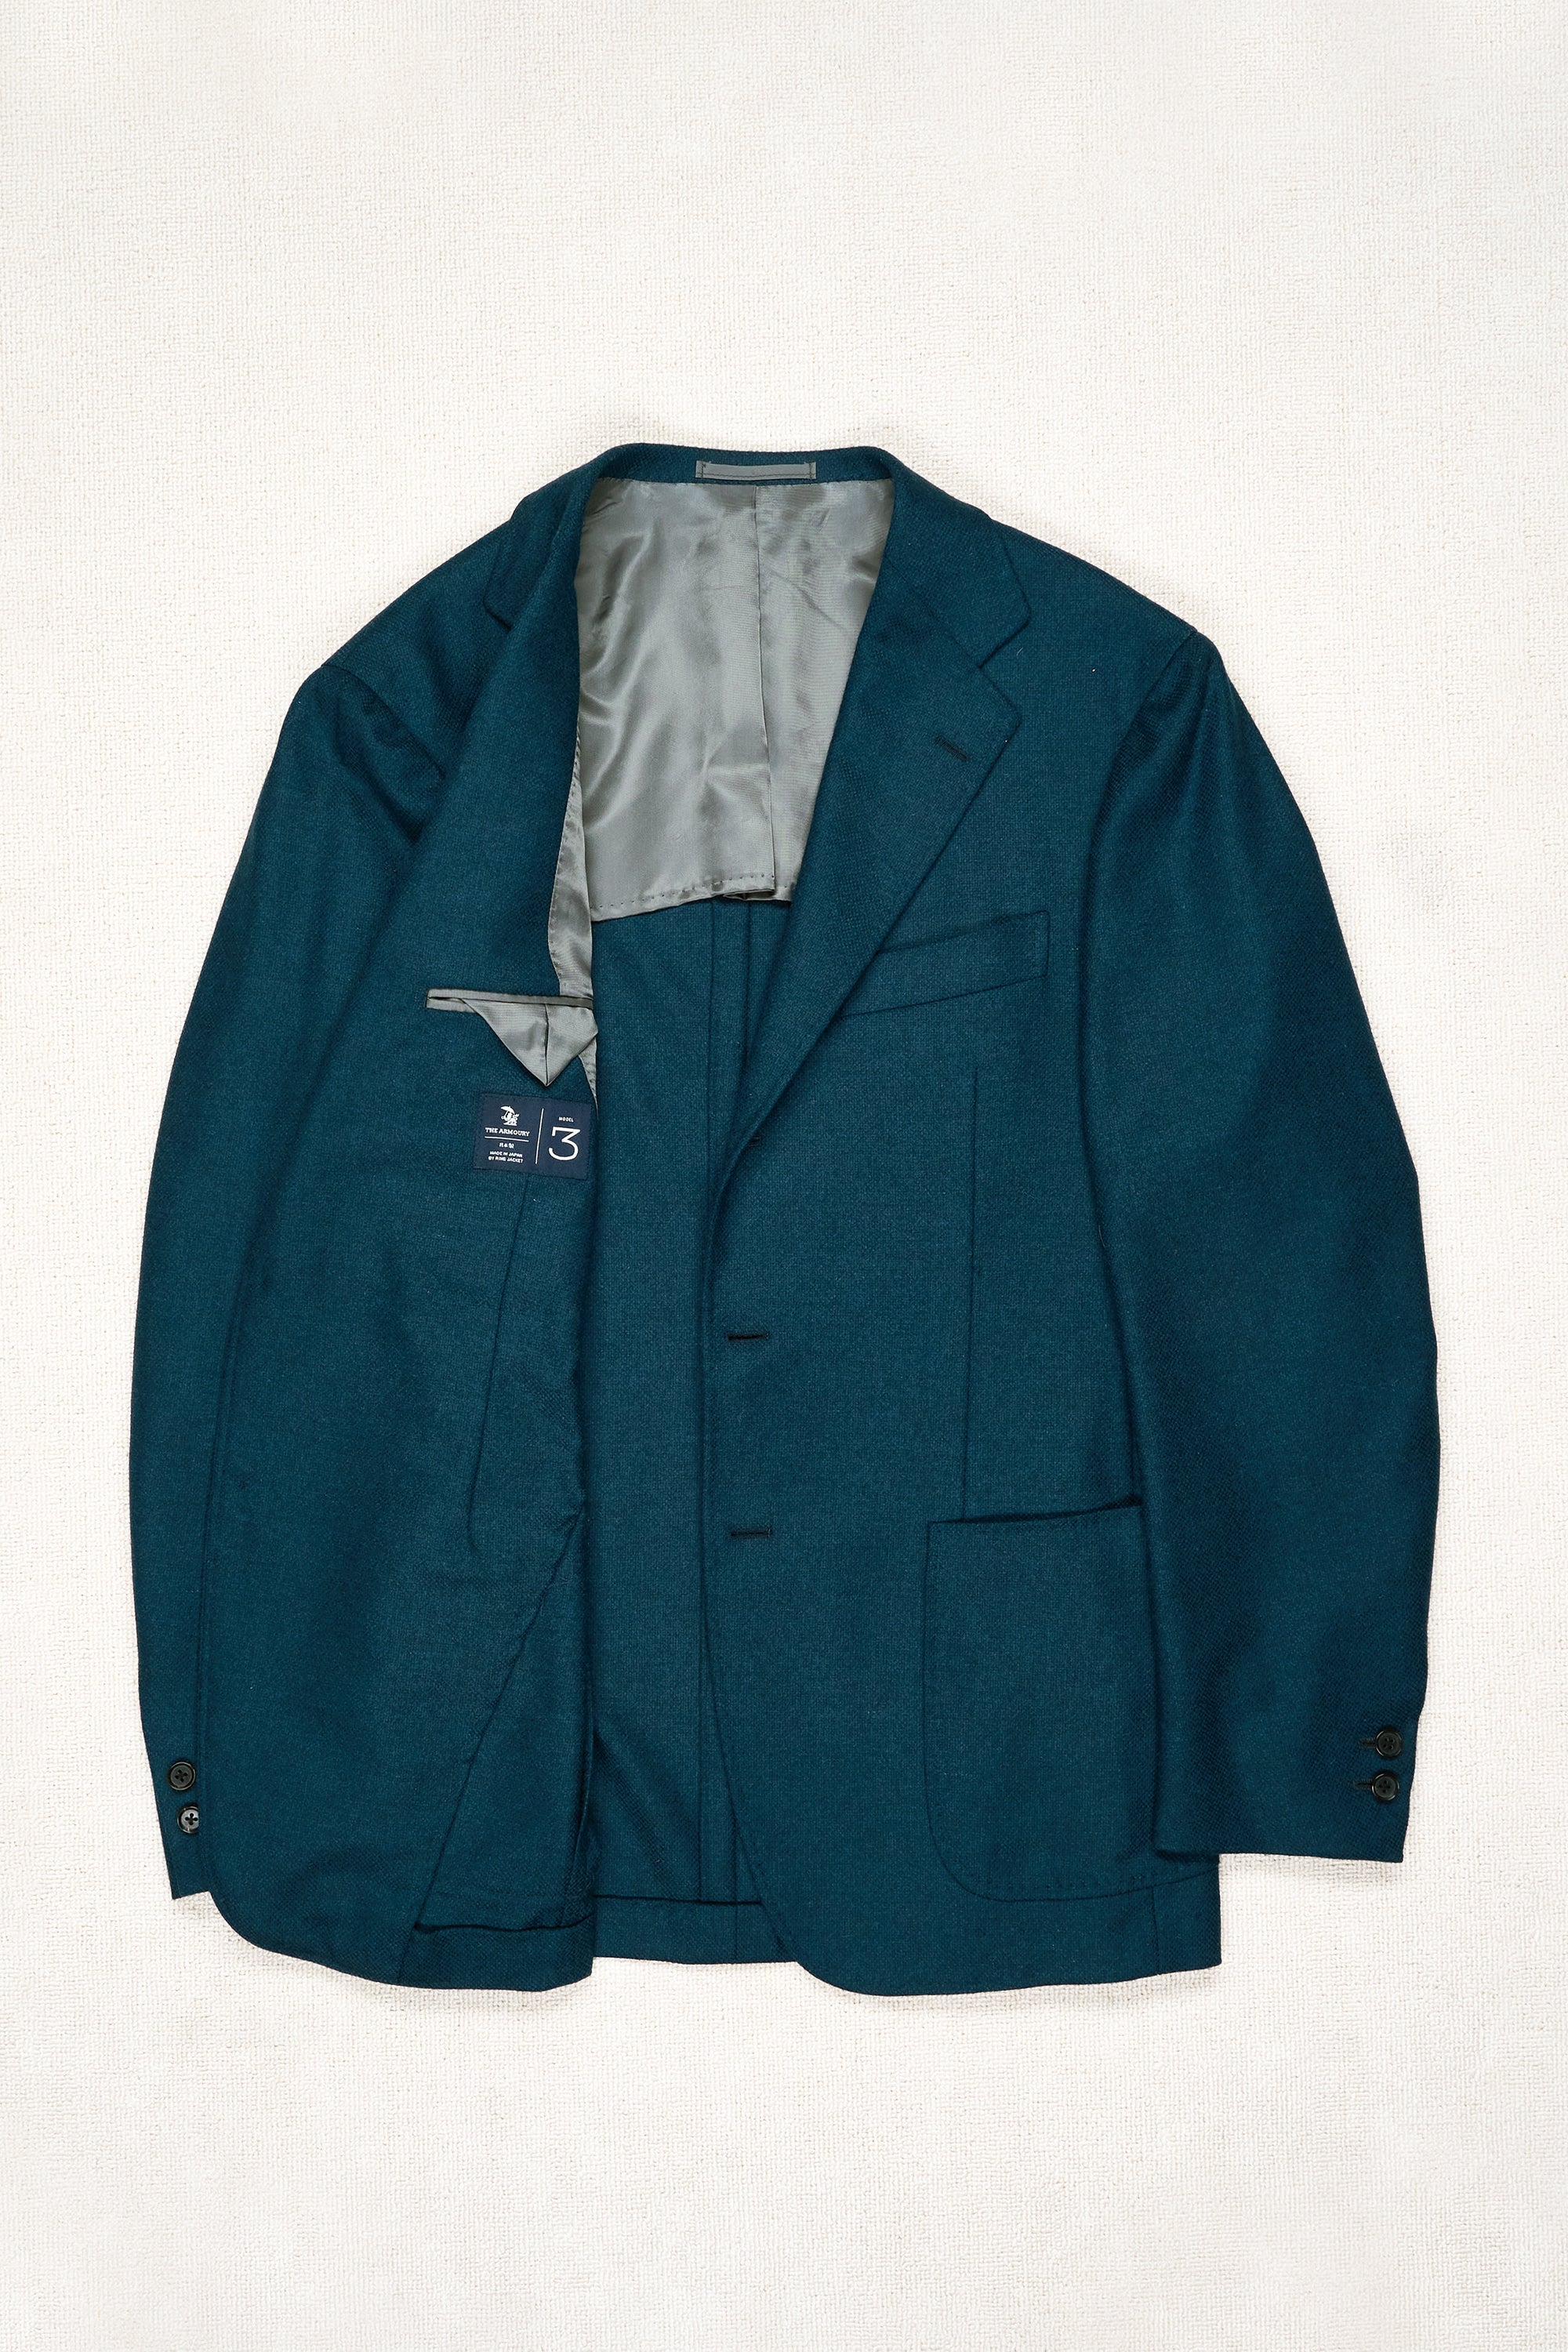 The Armoury by Ring Jacket Model 3 Blue Green Wool Sport Coat